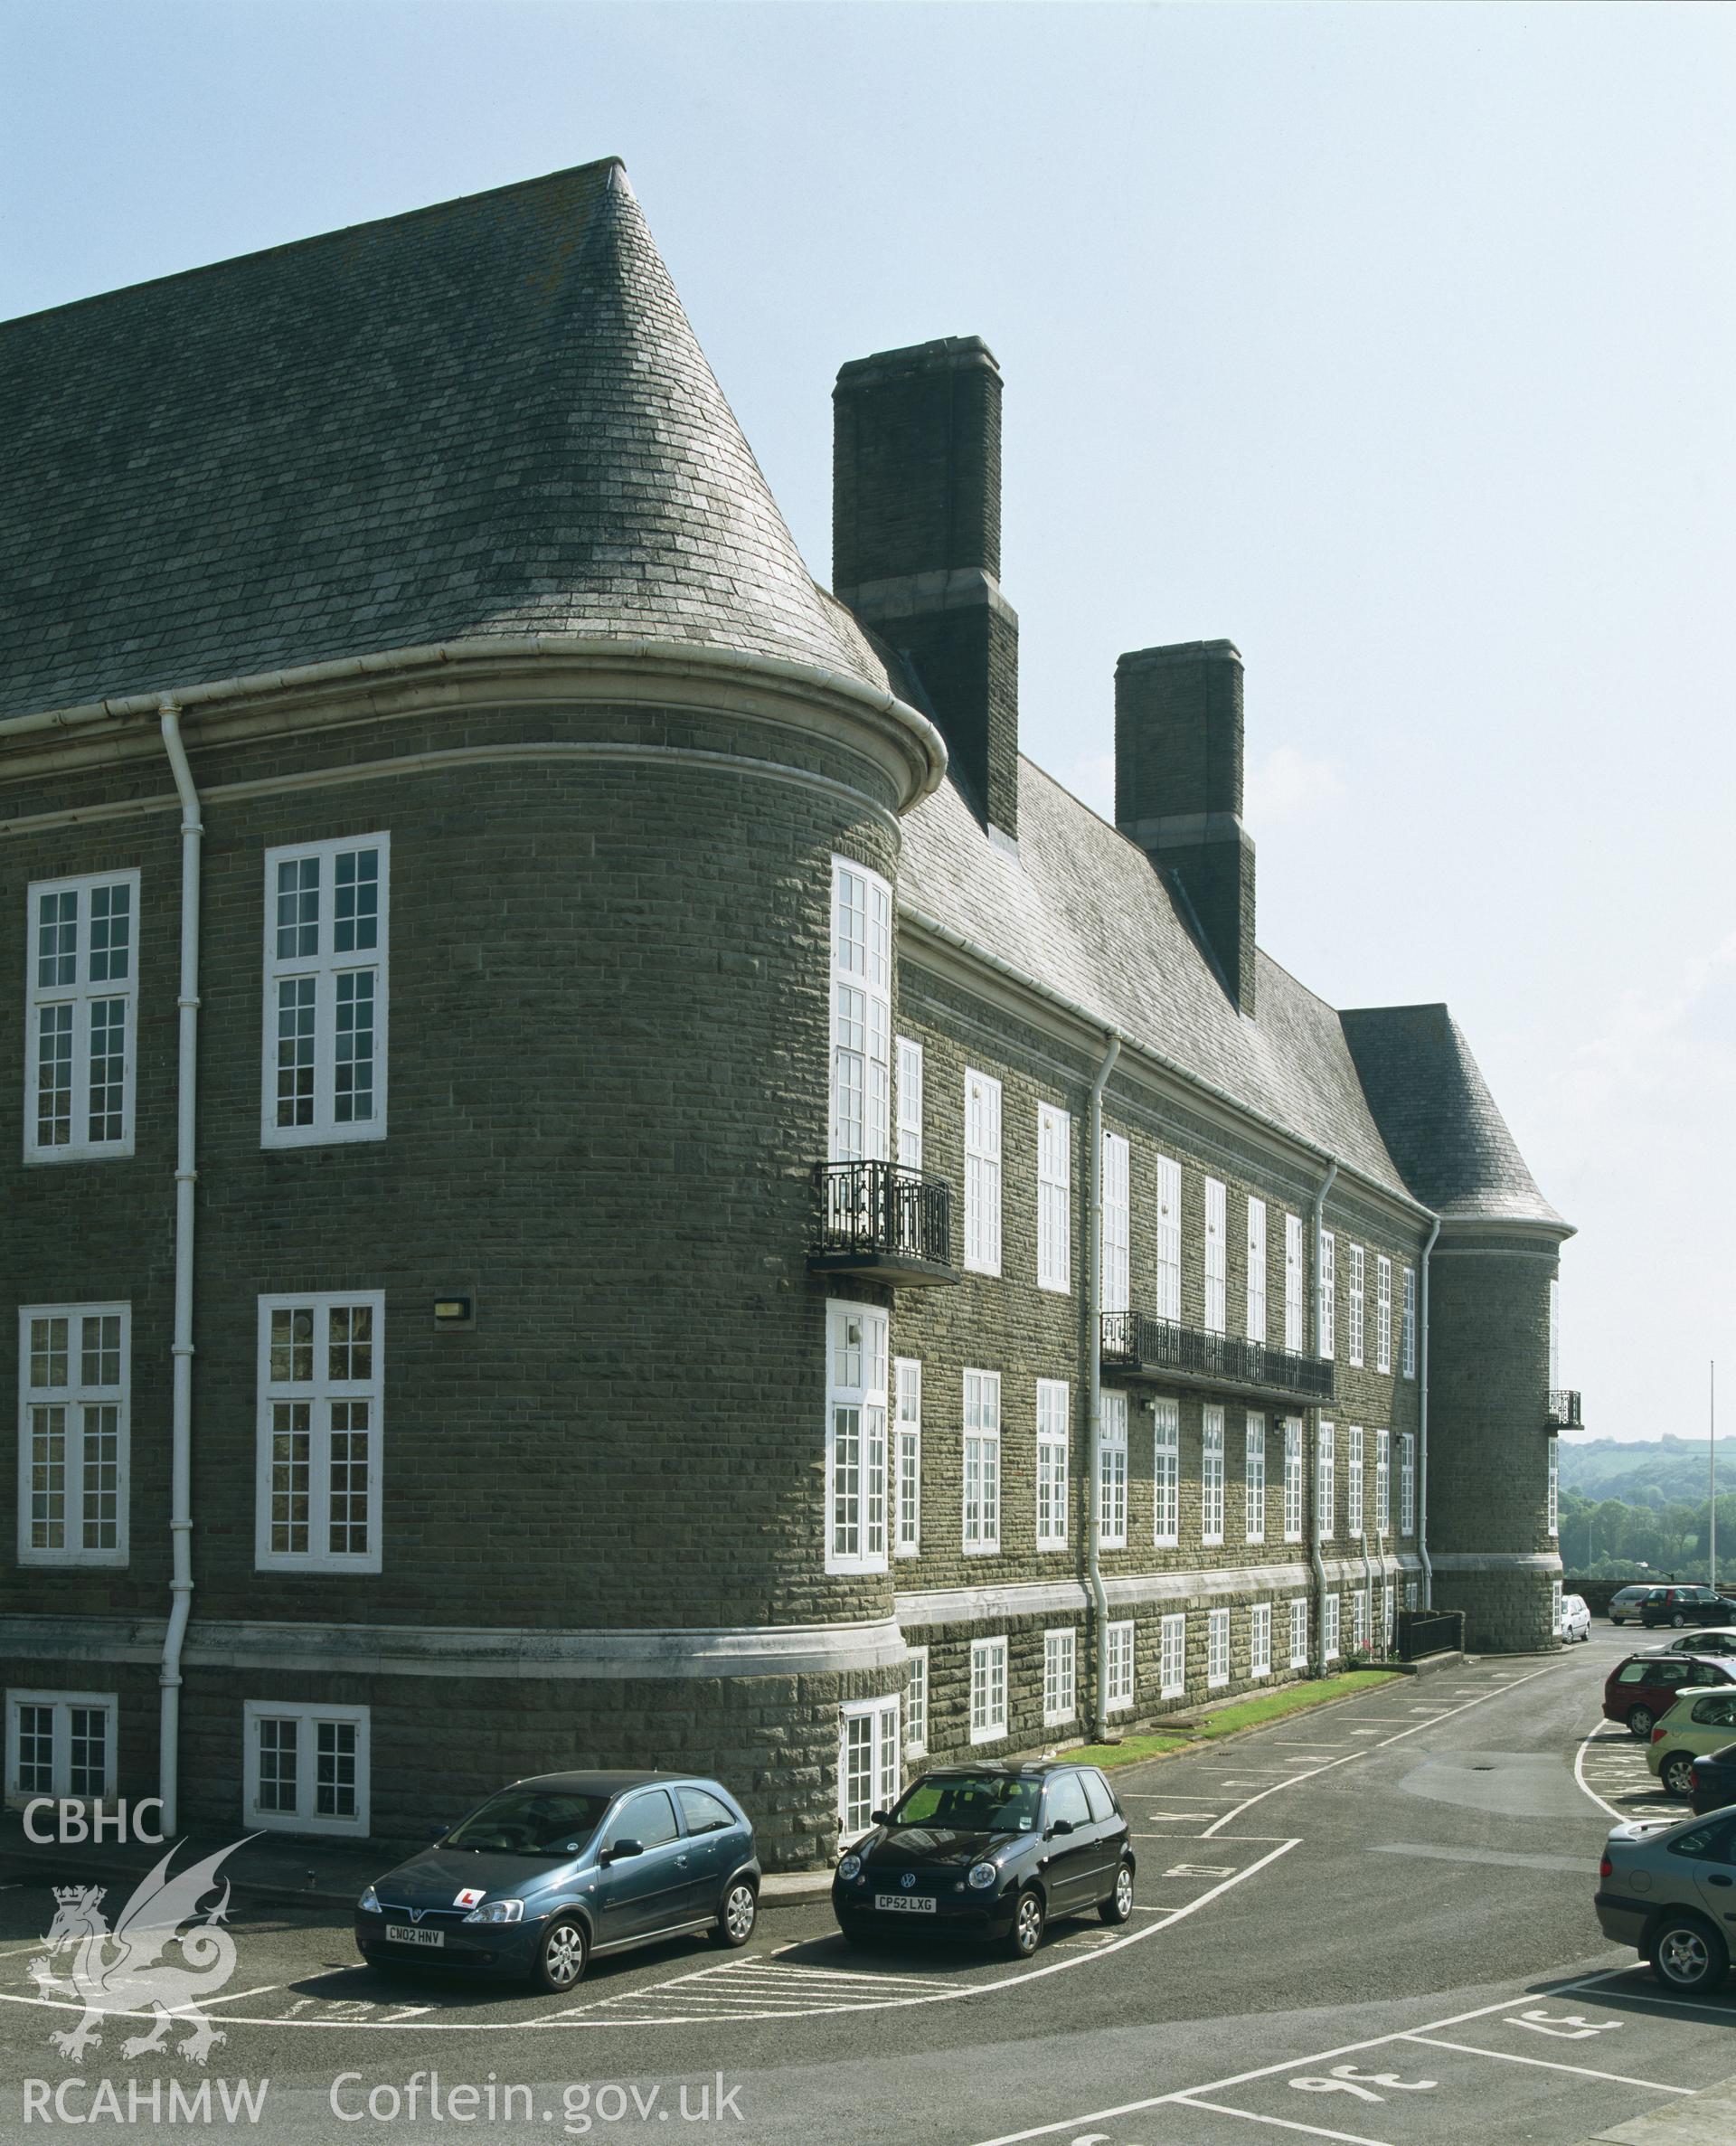 Colour transparency showing County Hall, Carmarthen, produced by Iain Wright, June 2004